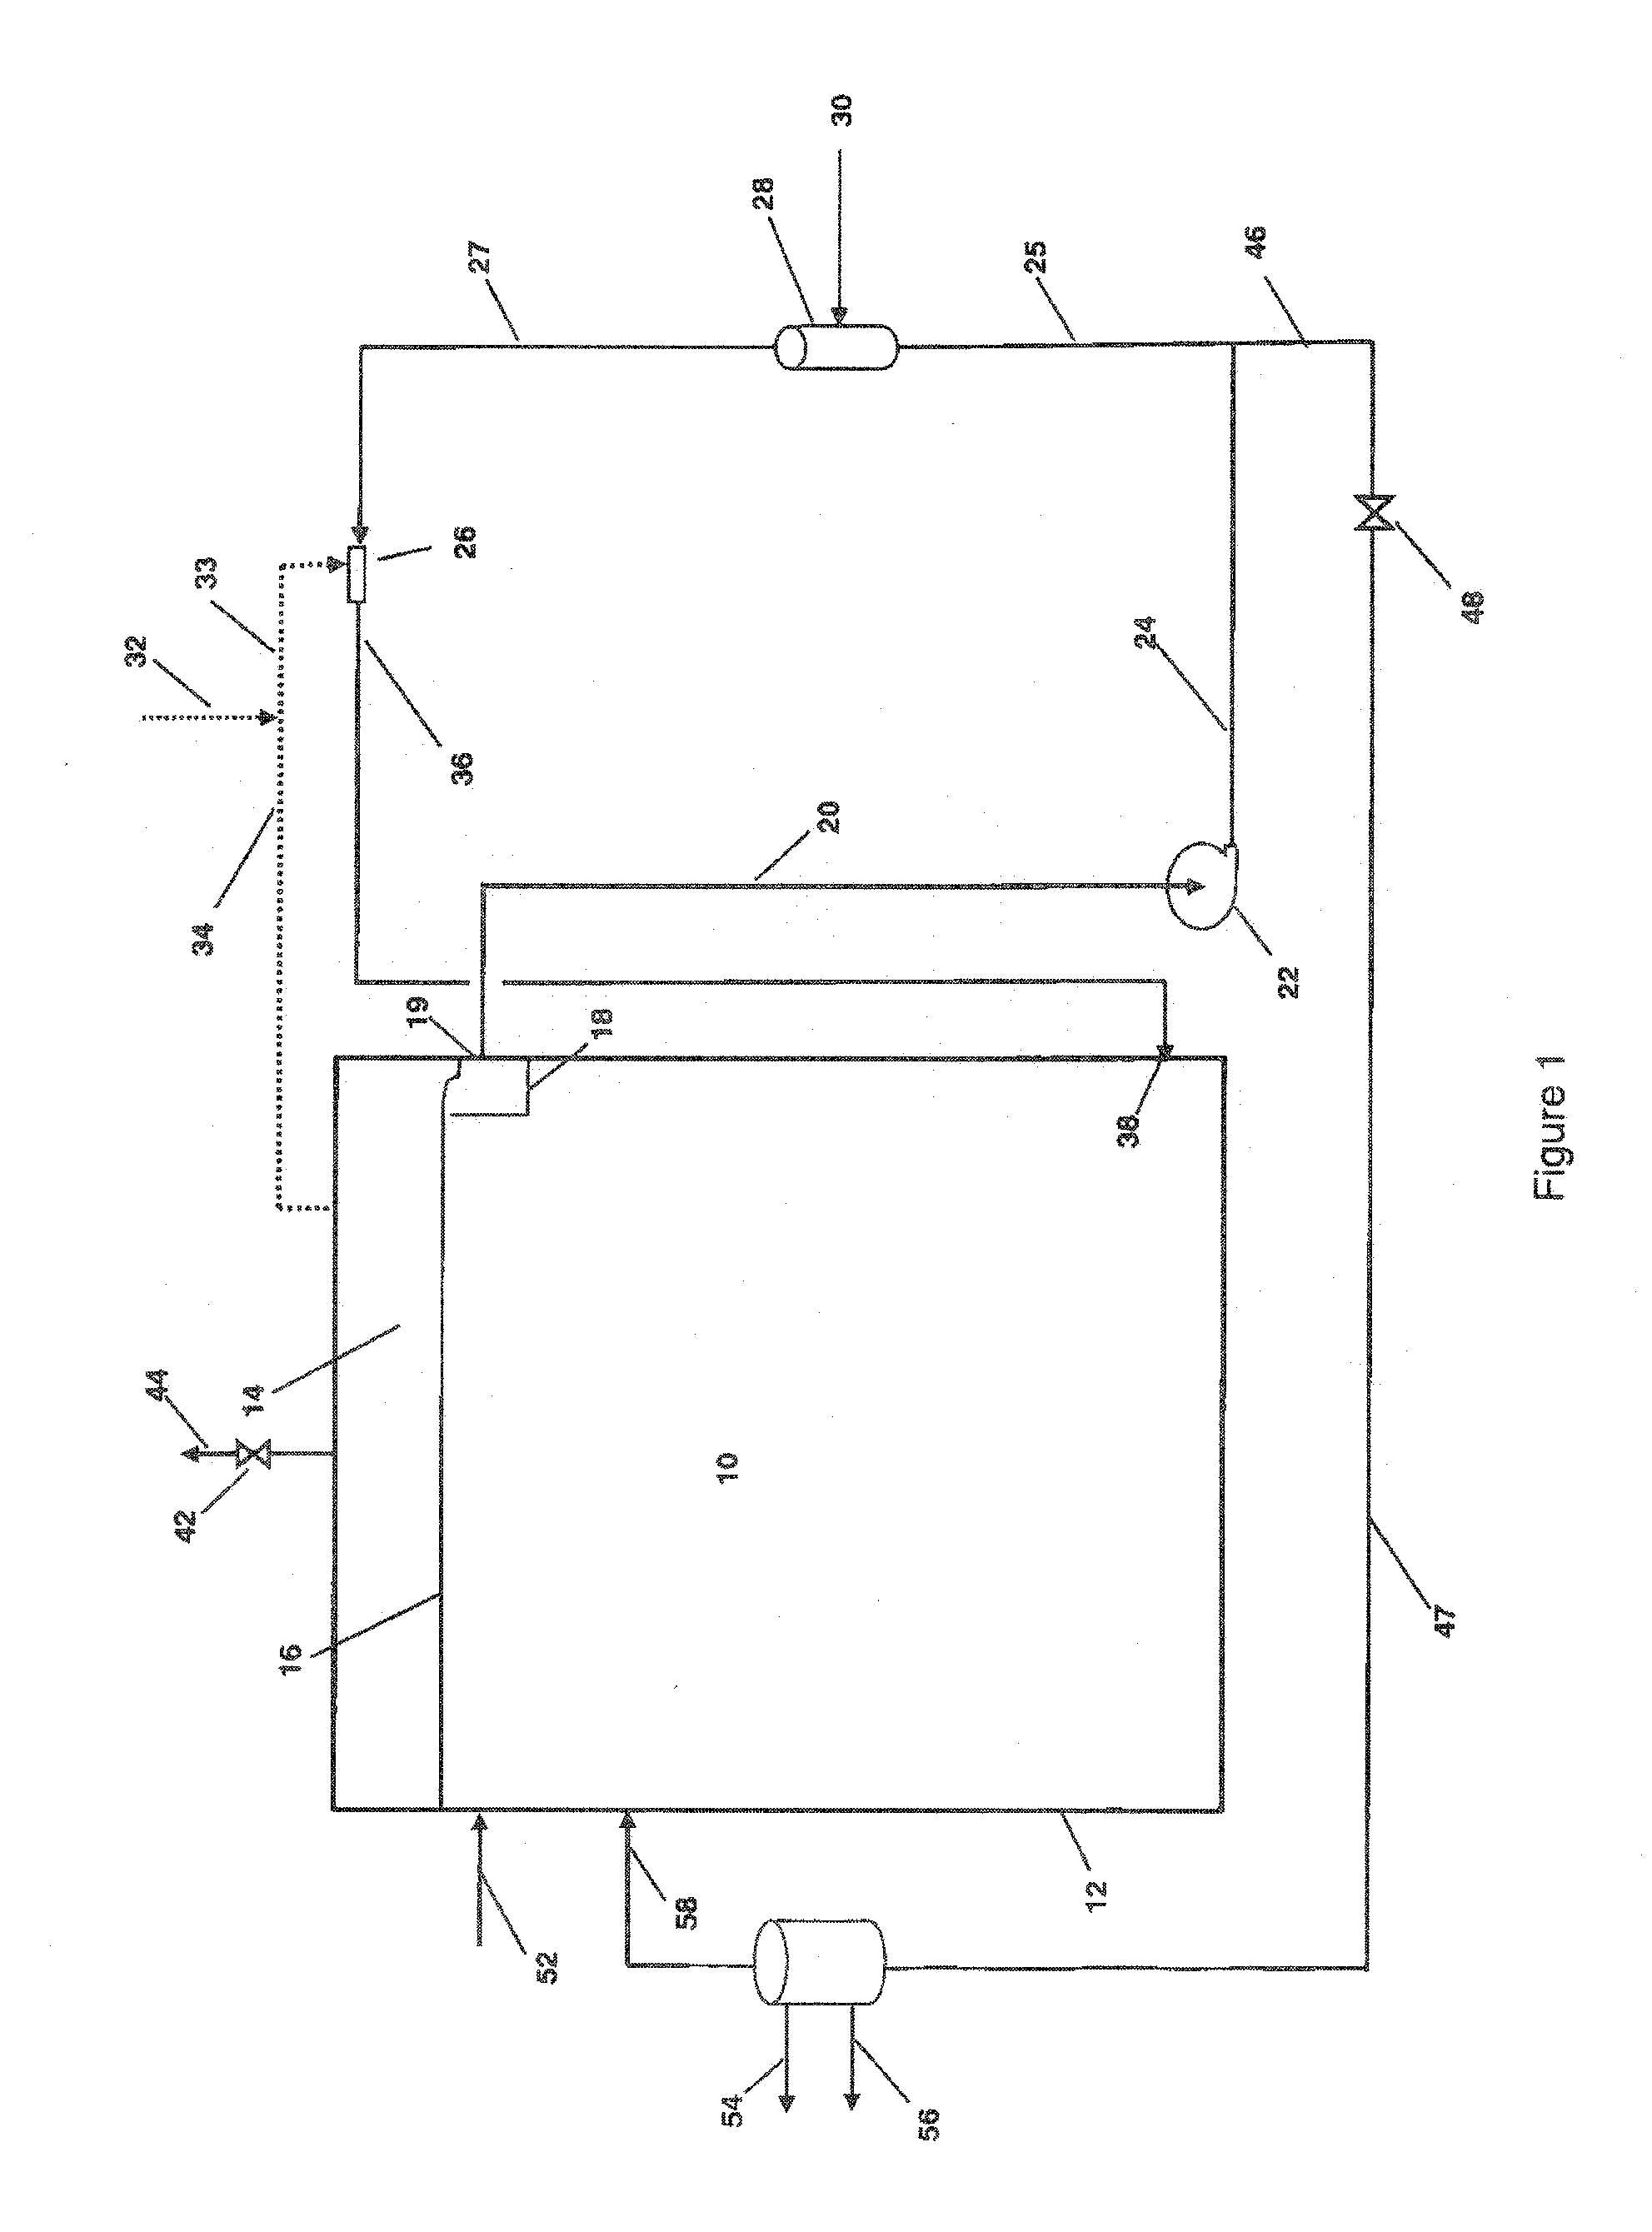 Method for Injecting a Feed Gas Stream into a Vertically Extended Column of Liquid